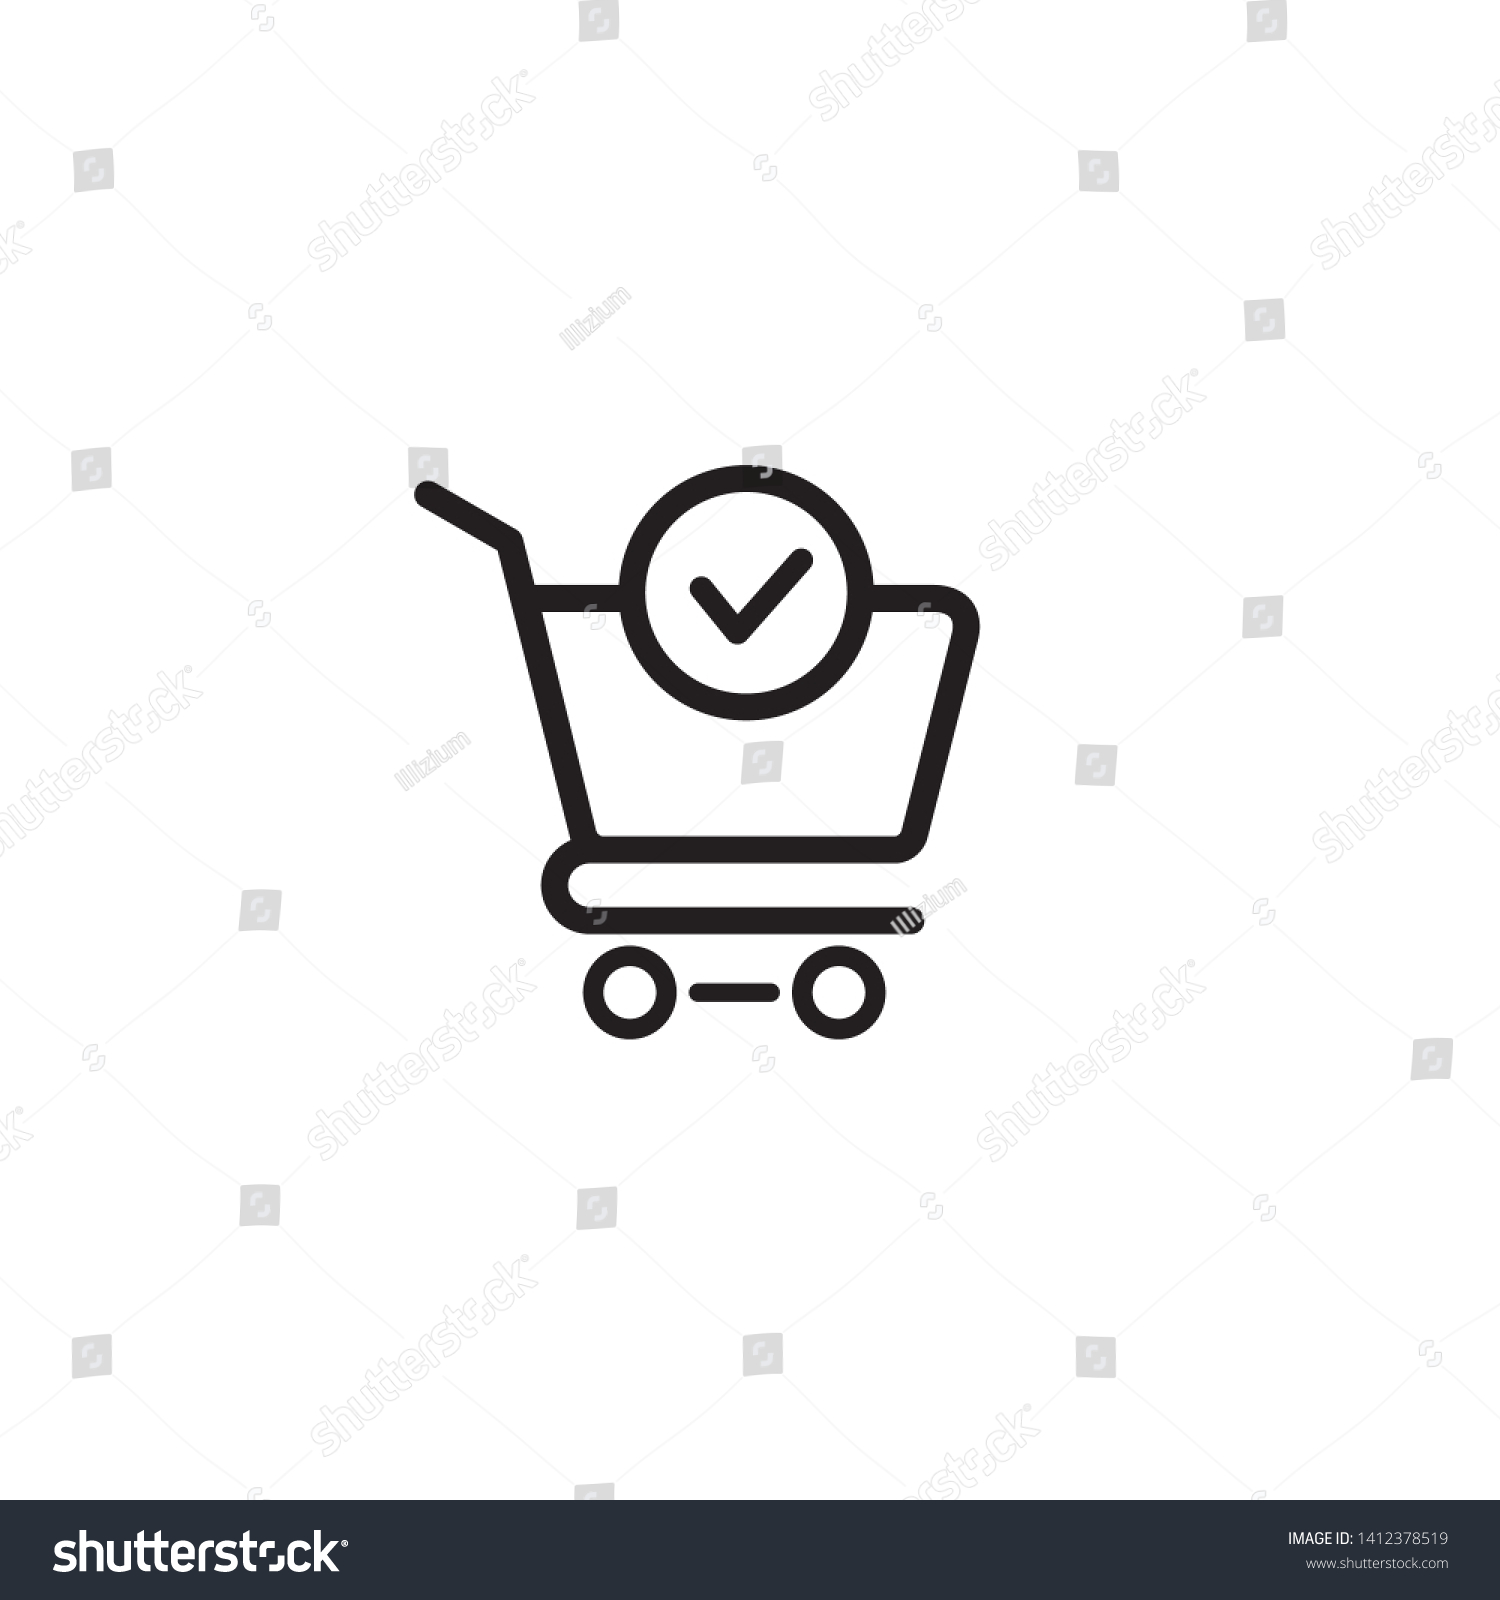 SVG of Shopping cart and check mark icon vector completed order, confirm flat sign symbols logo illustration isolated on white background black color. Concept design art for business and online Marketing svg